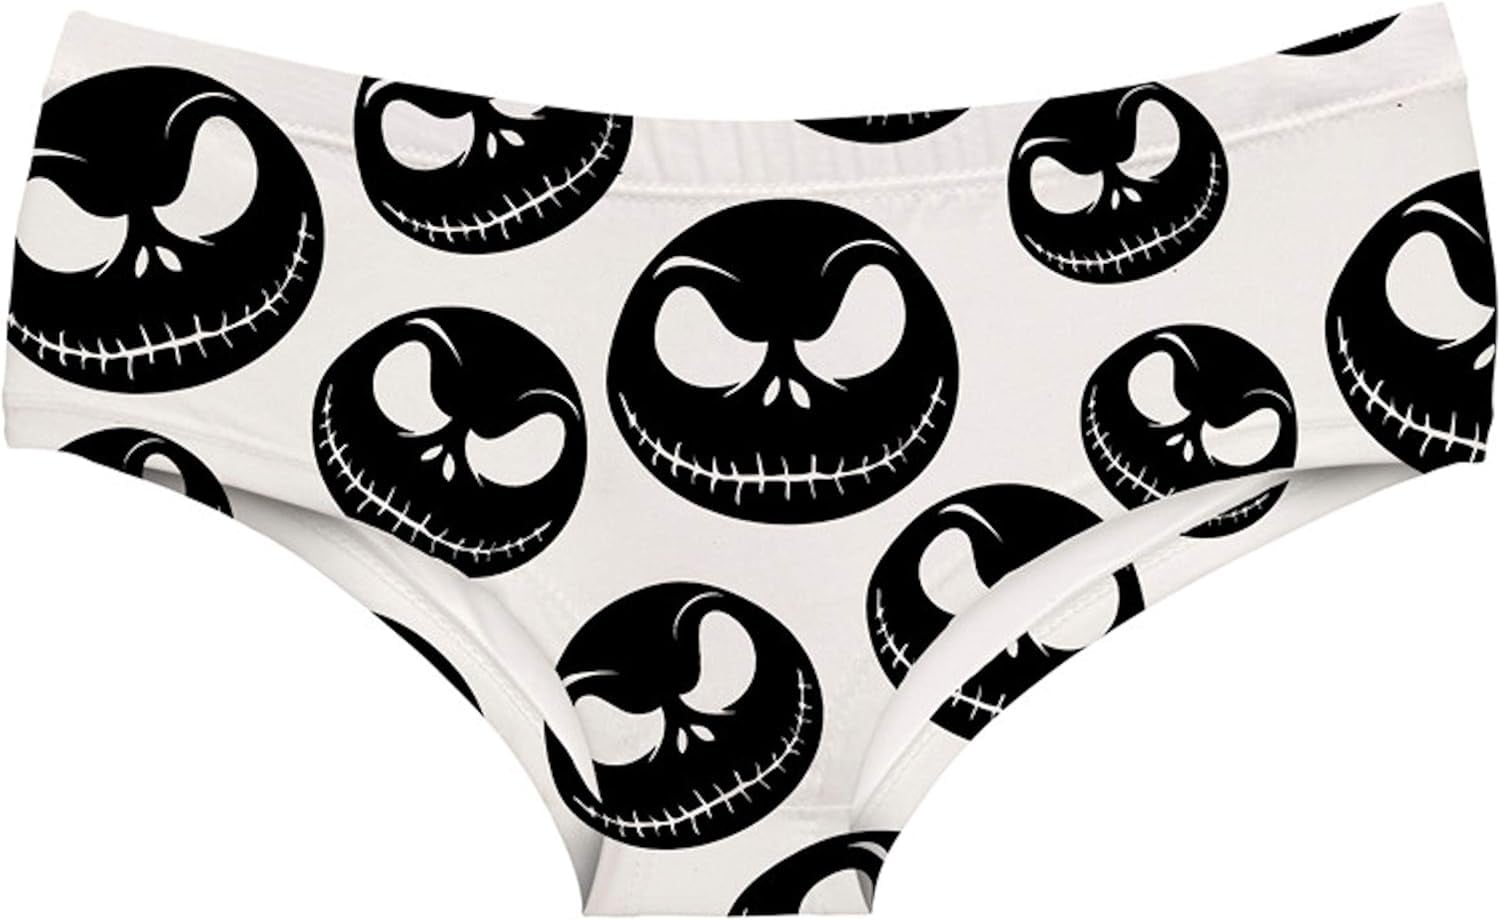 Crush of the Week: Gear up for Spooky Szn with Halloween panties